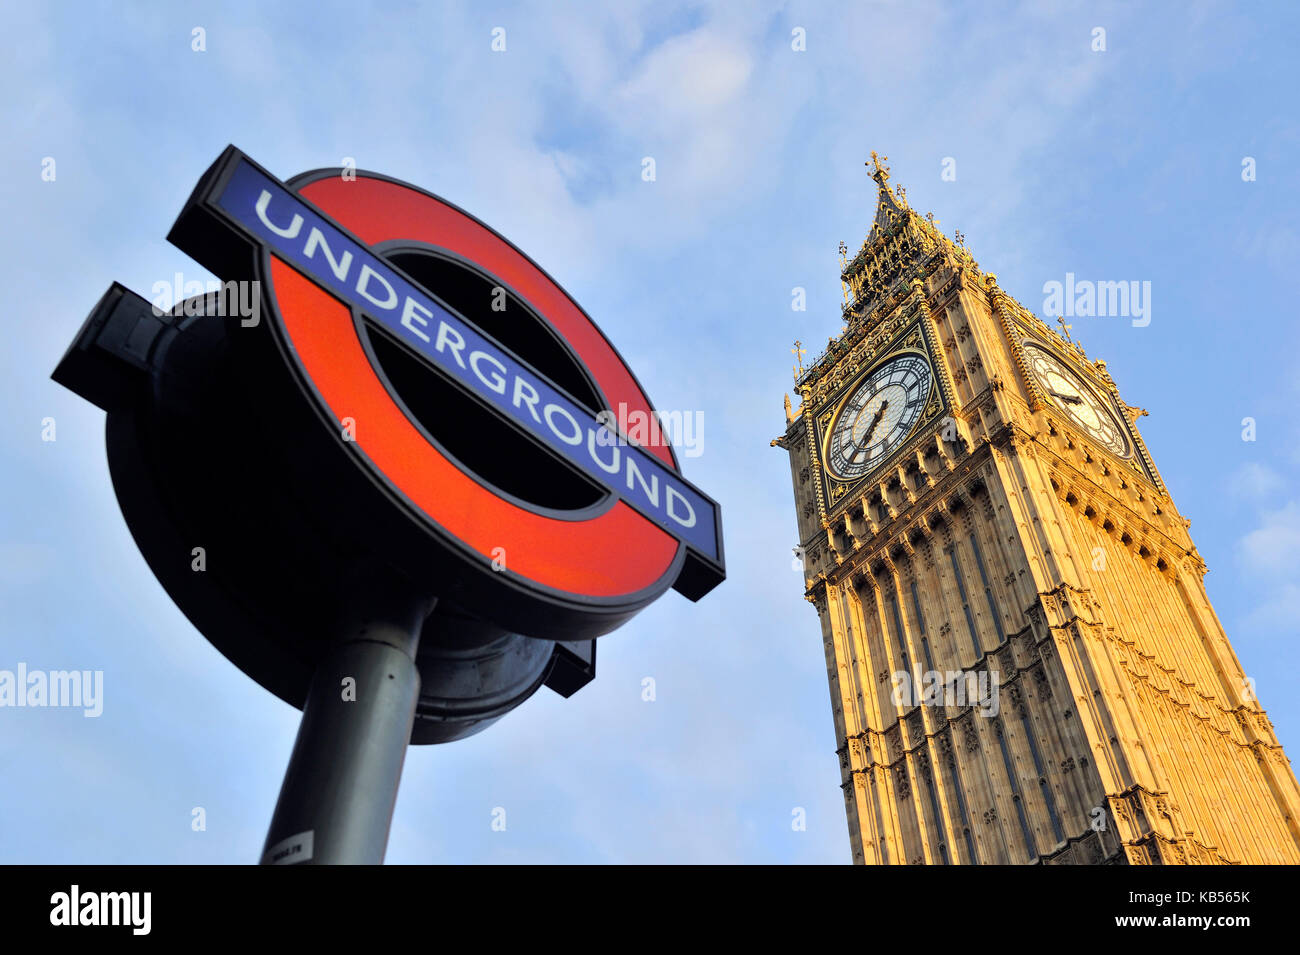 United Kingdom, London, Westminster, Big Ben and underground sign (Logo « Undergound » registered, request for authorization necessary before publication) Stock Photo